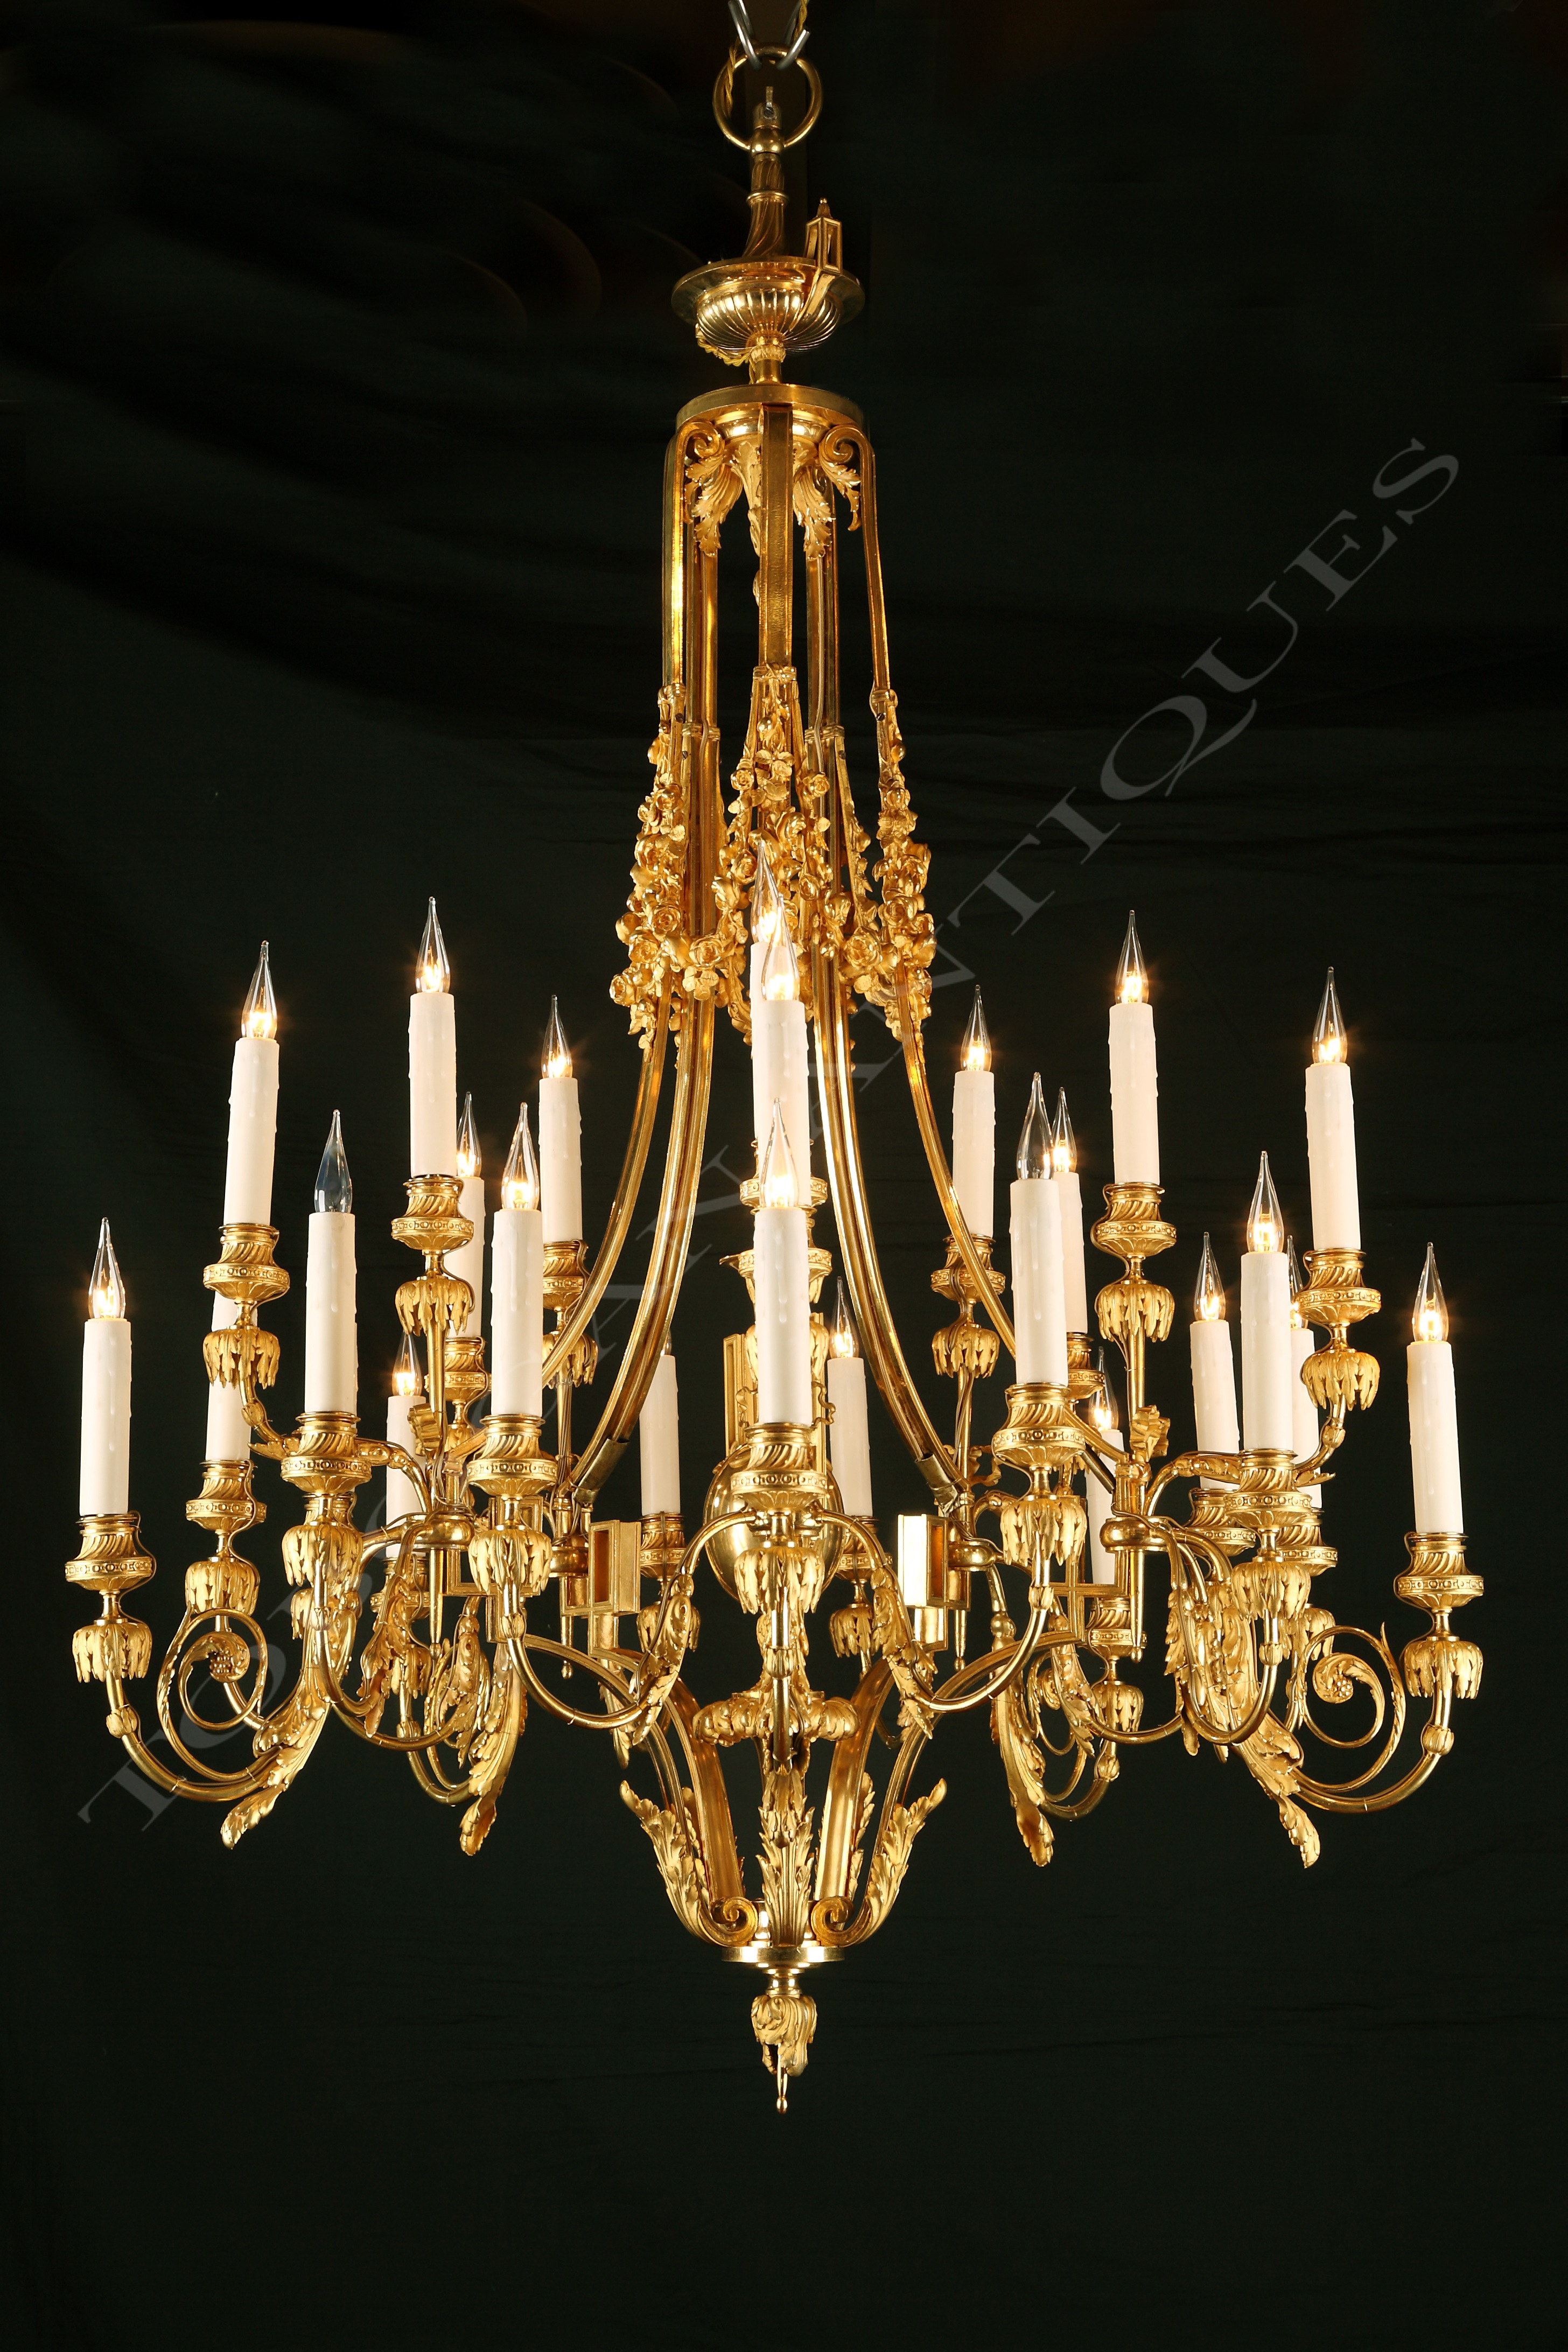 F. Barbedienne<br />Neoclassical chandelier